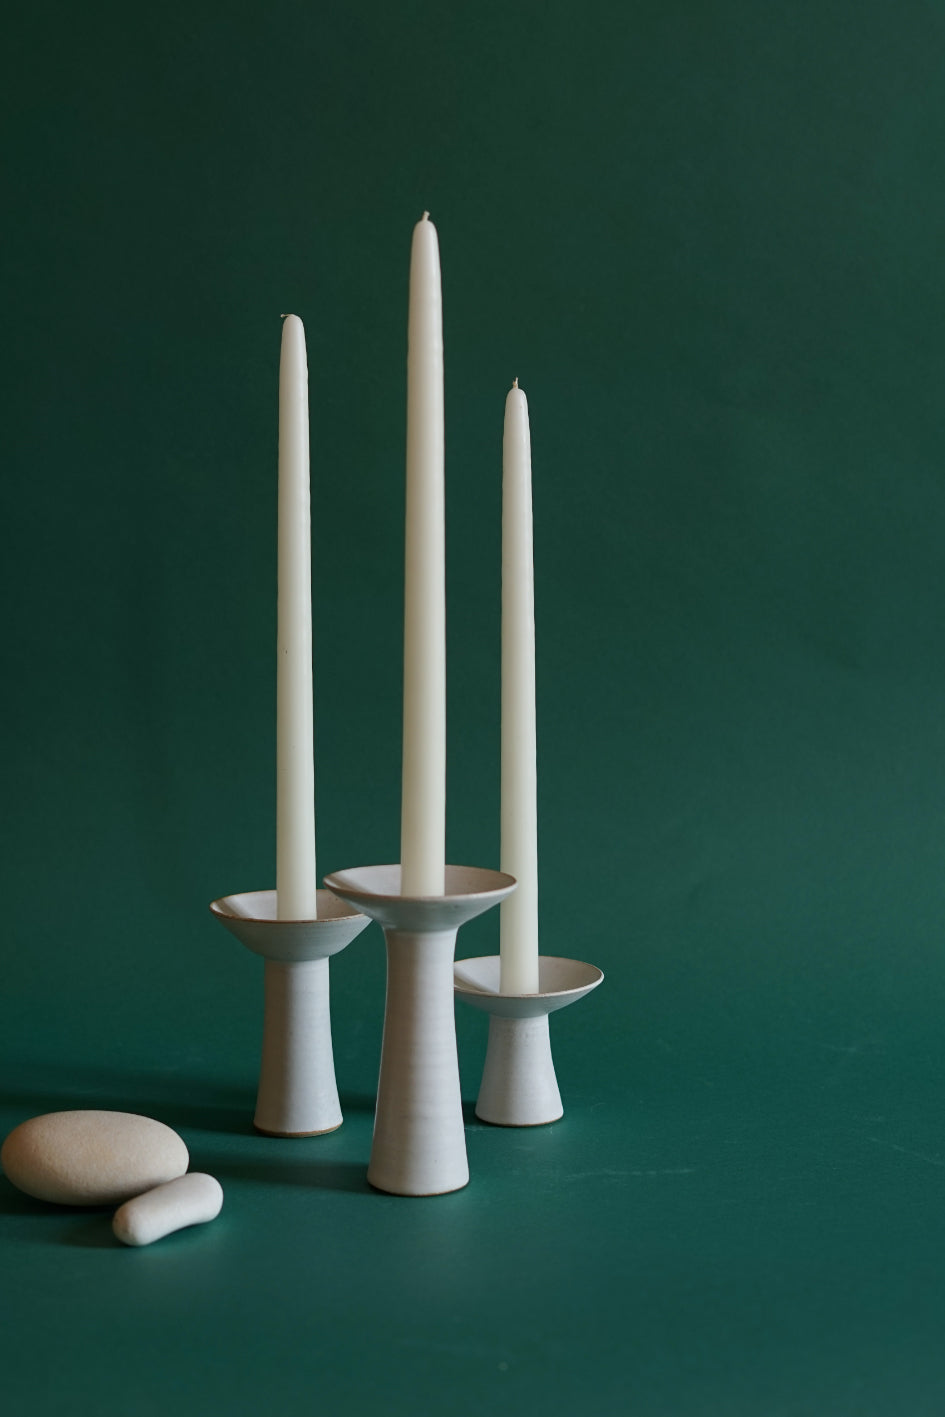 Small, medium and large candlesticks by Cara Guthrie, a young ceramicist based in Perthshire.